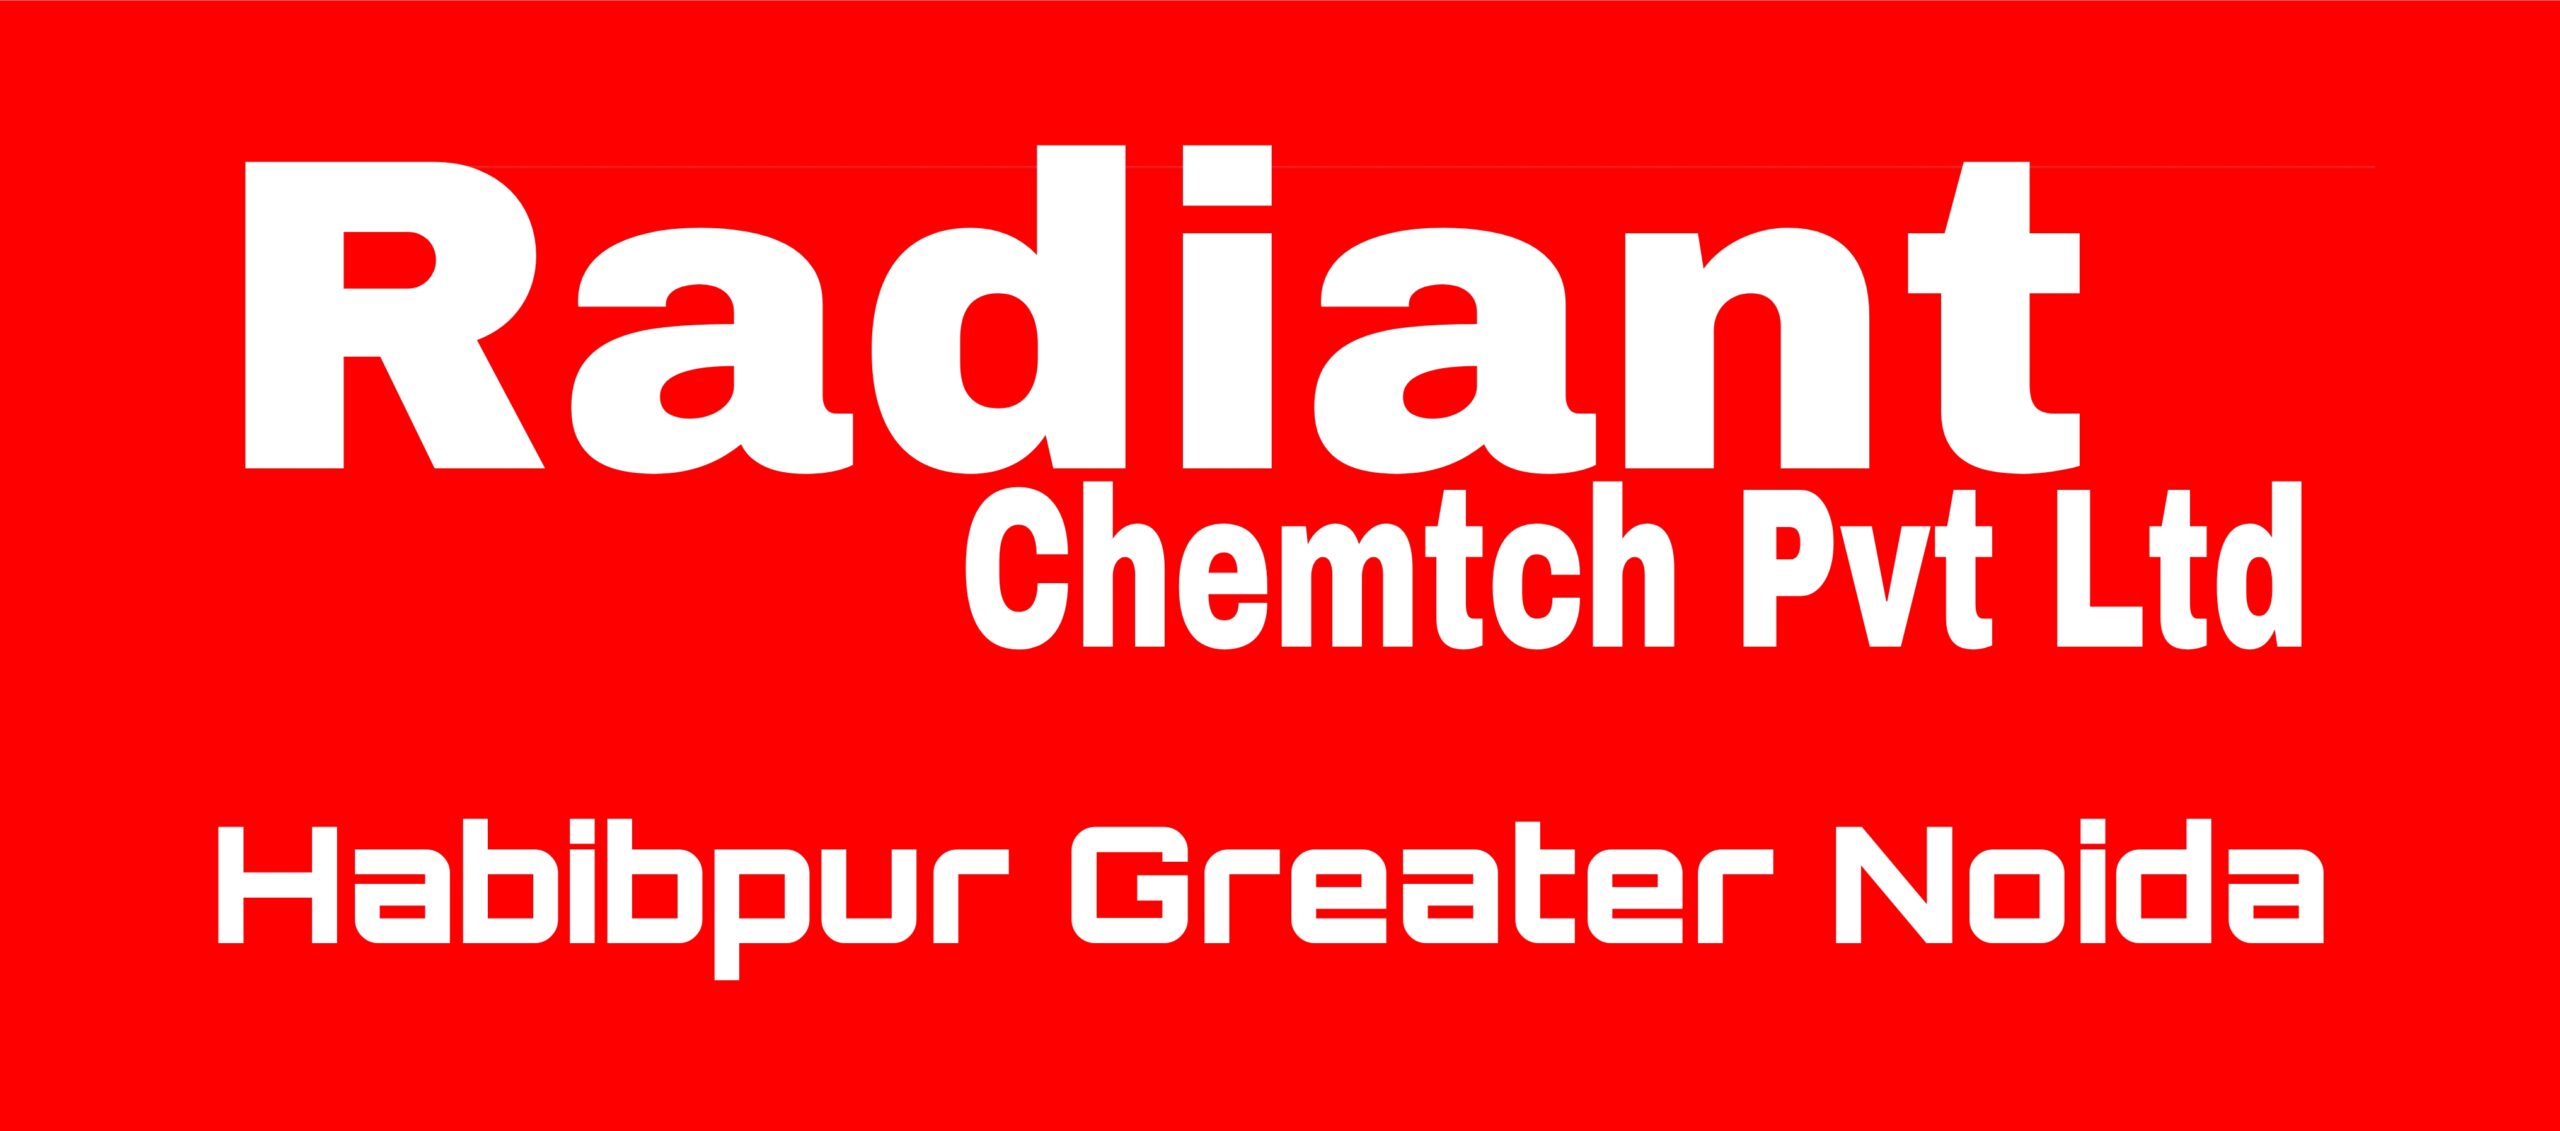 Radiant Chemtech Company Job in Greater Noida